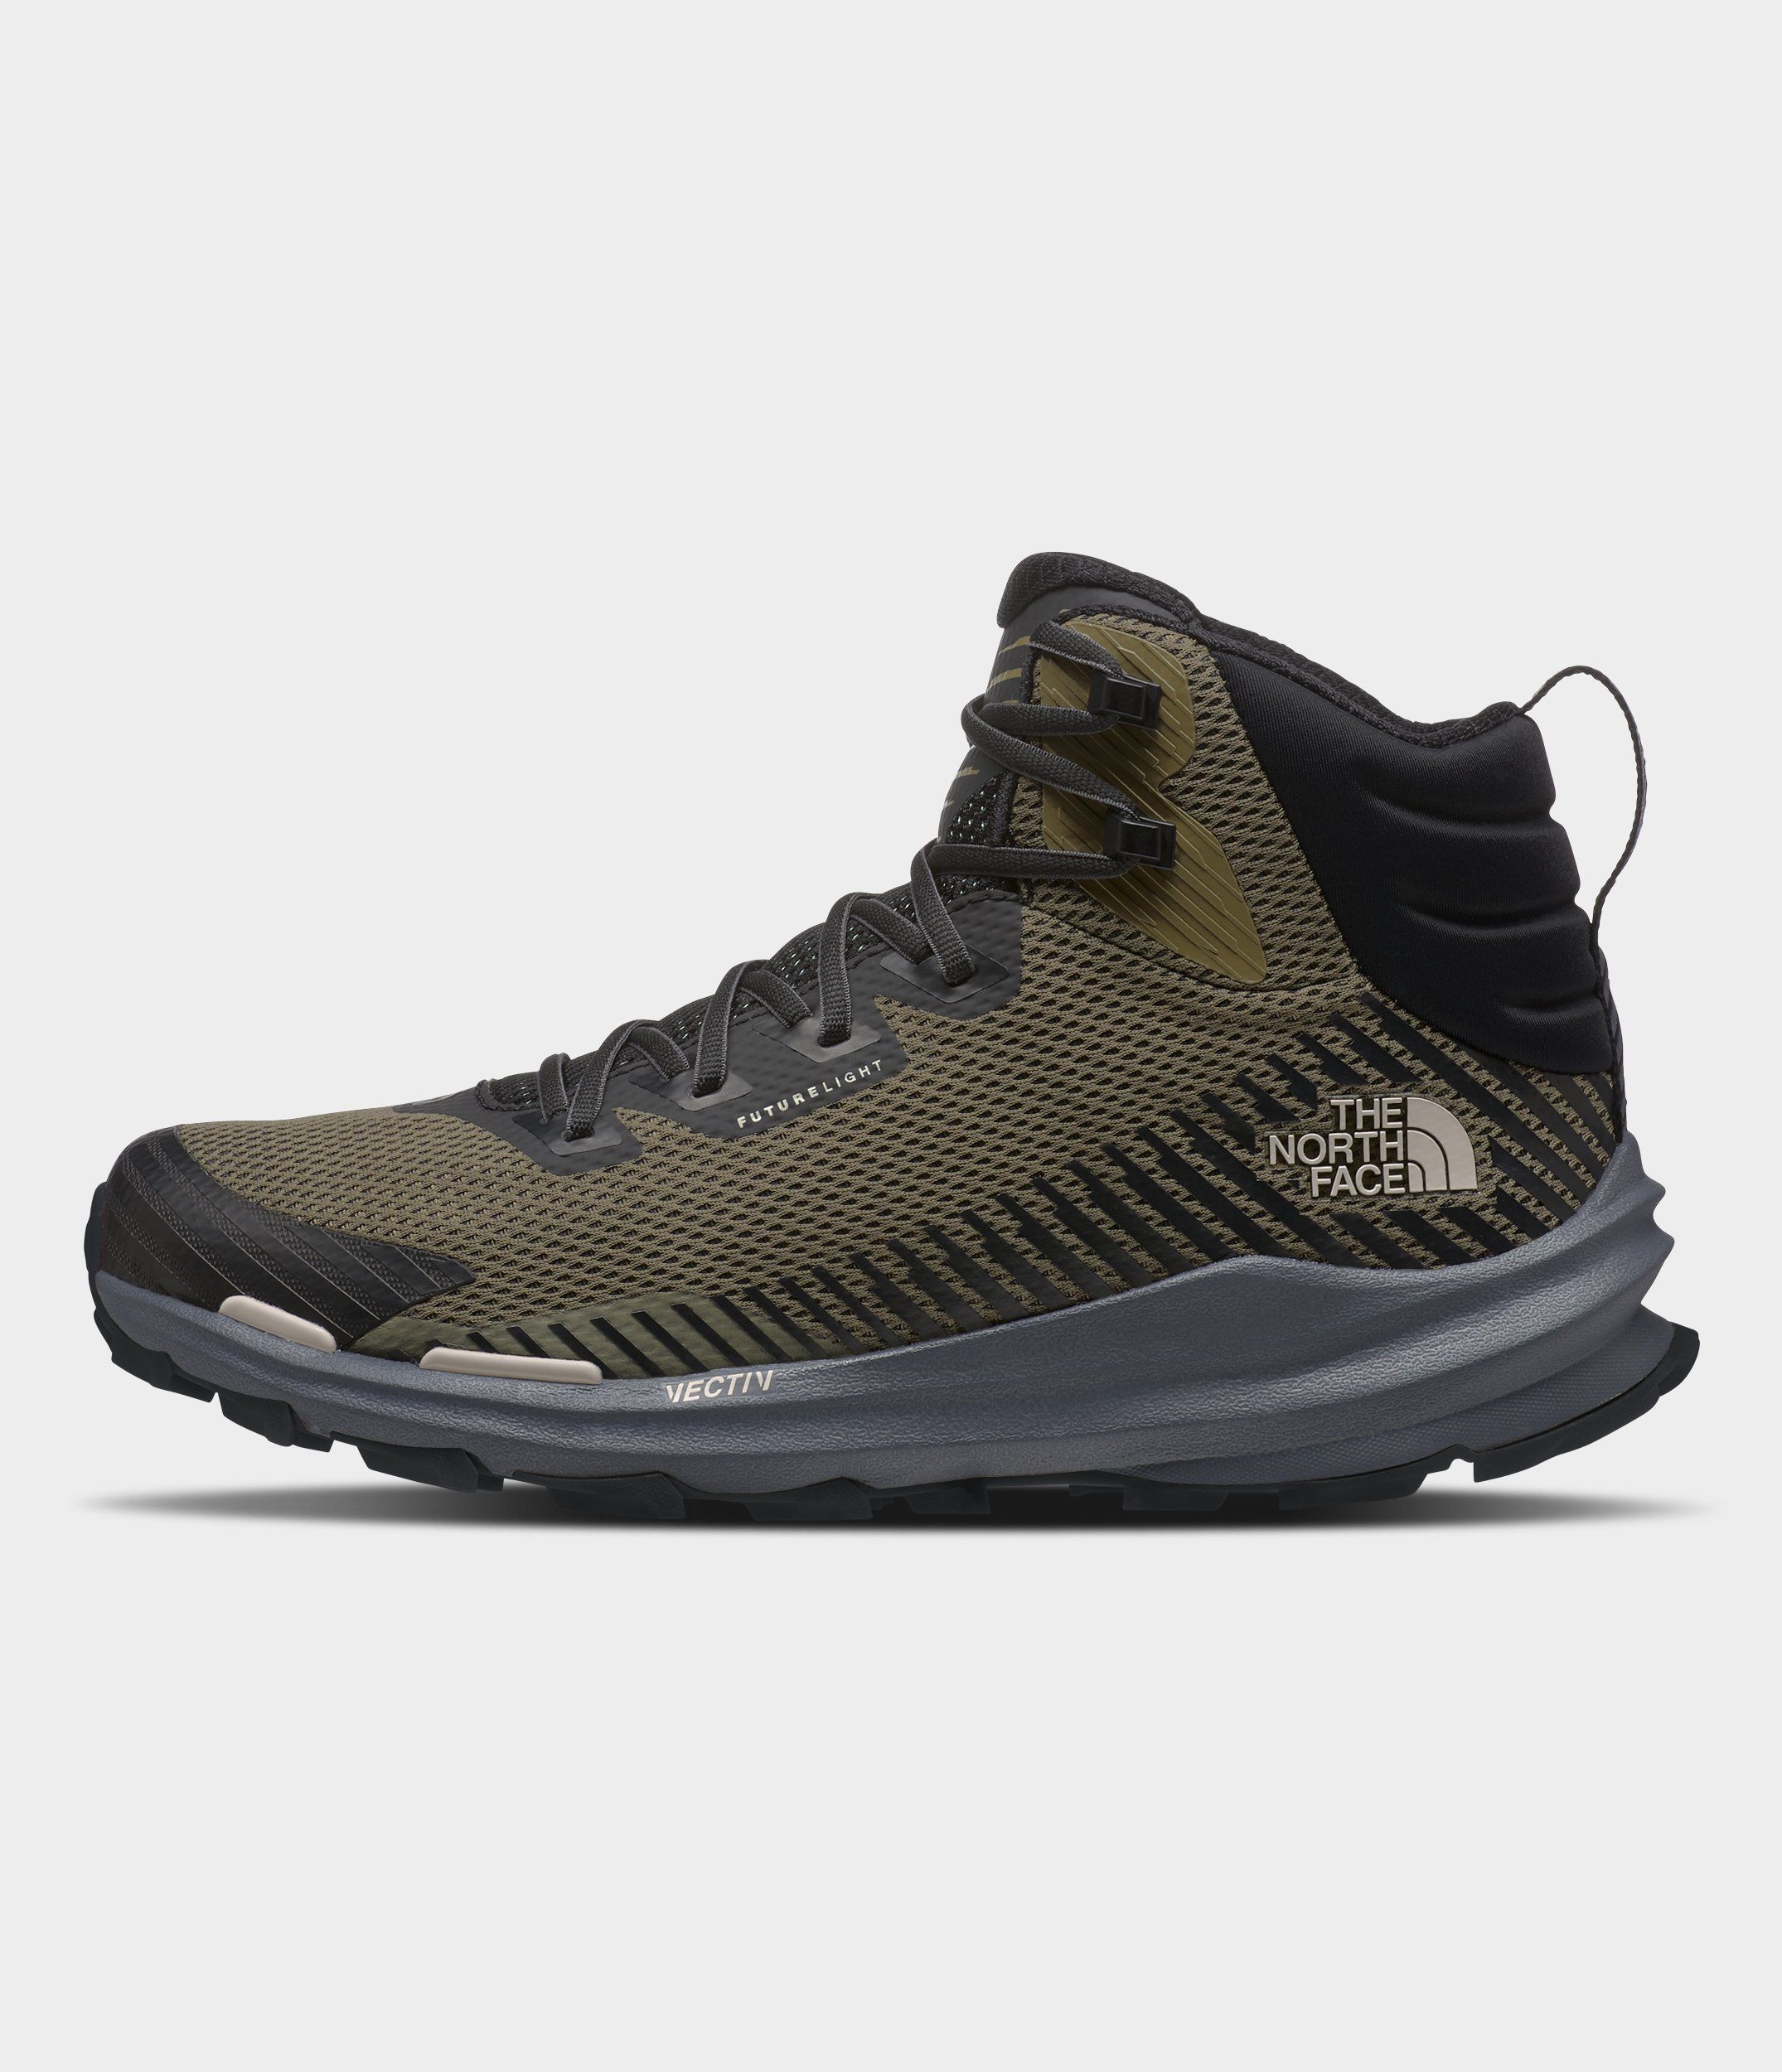 Image of The North Face Men’s Vectiv Fastpack Mid Futurelight Boots